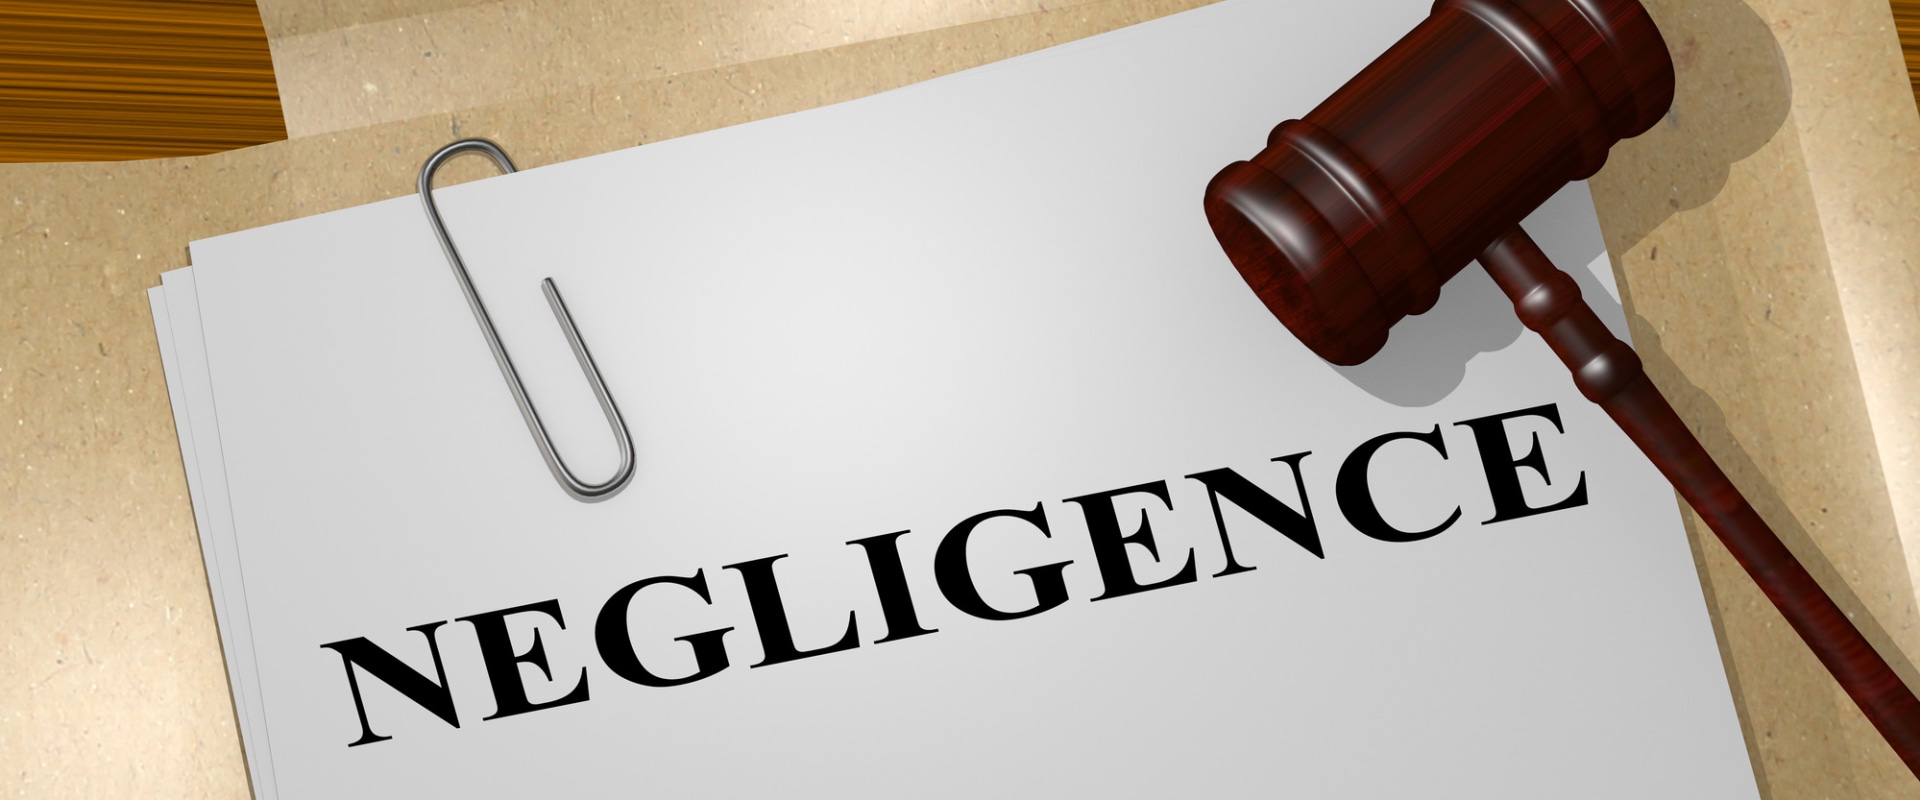 What are the 4 elements of negligence in law?